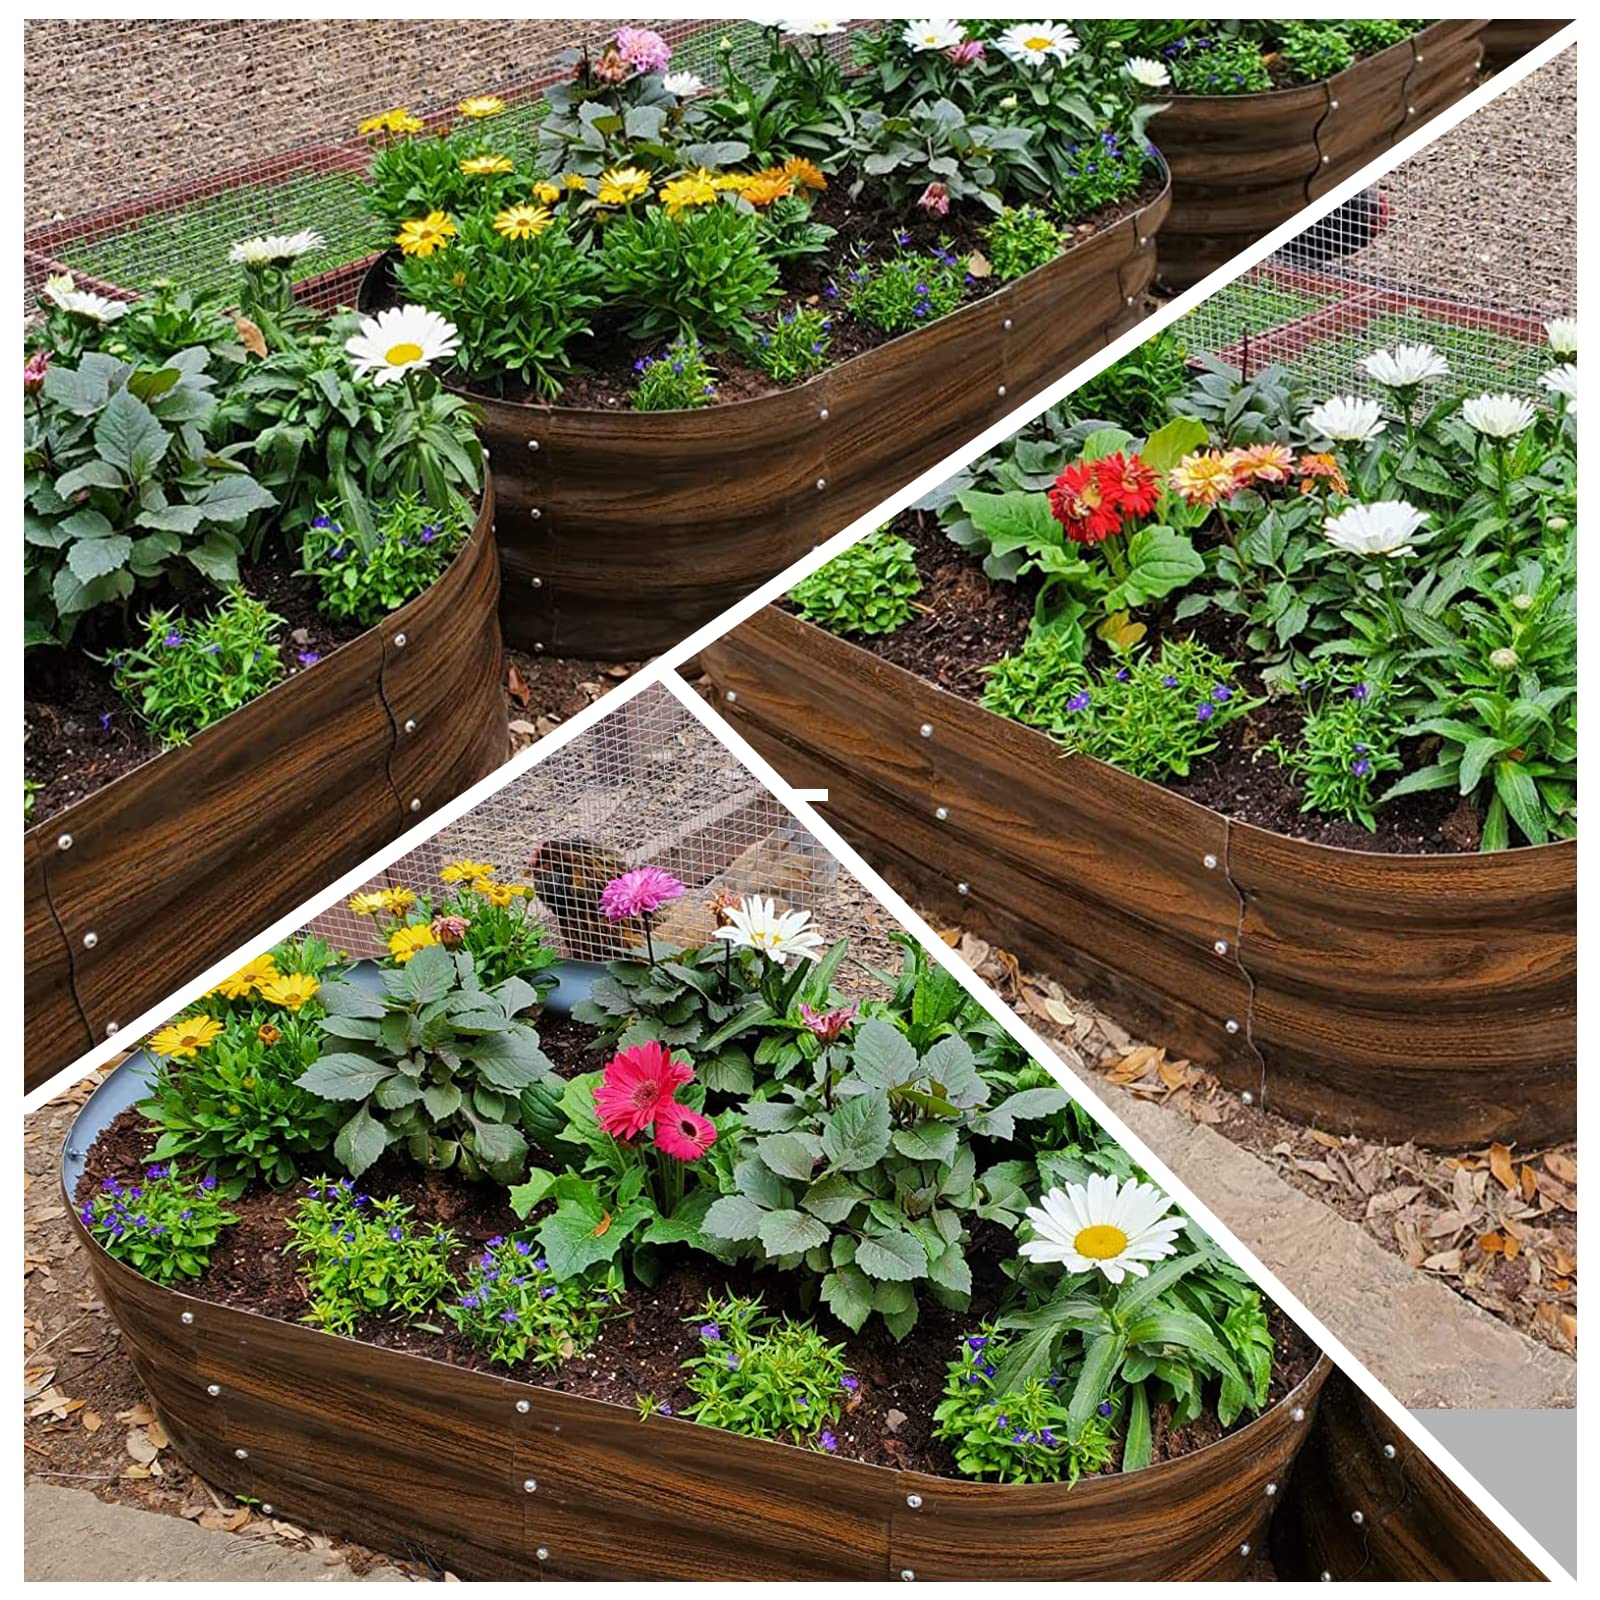 SnugNiture Galvanized Raised Garden Bed Outdoor, 2 Pcs 4x2x1ft Oval Metal Planter Box for Planting Plants Vegetables, Brown